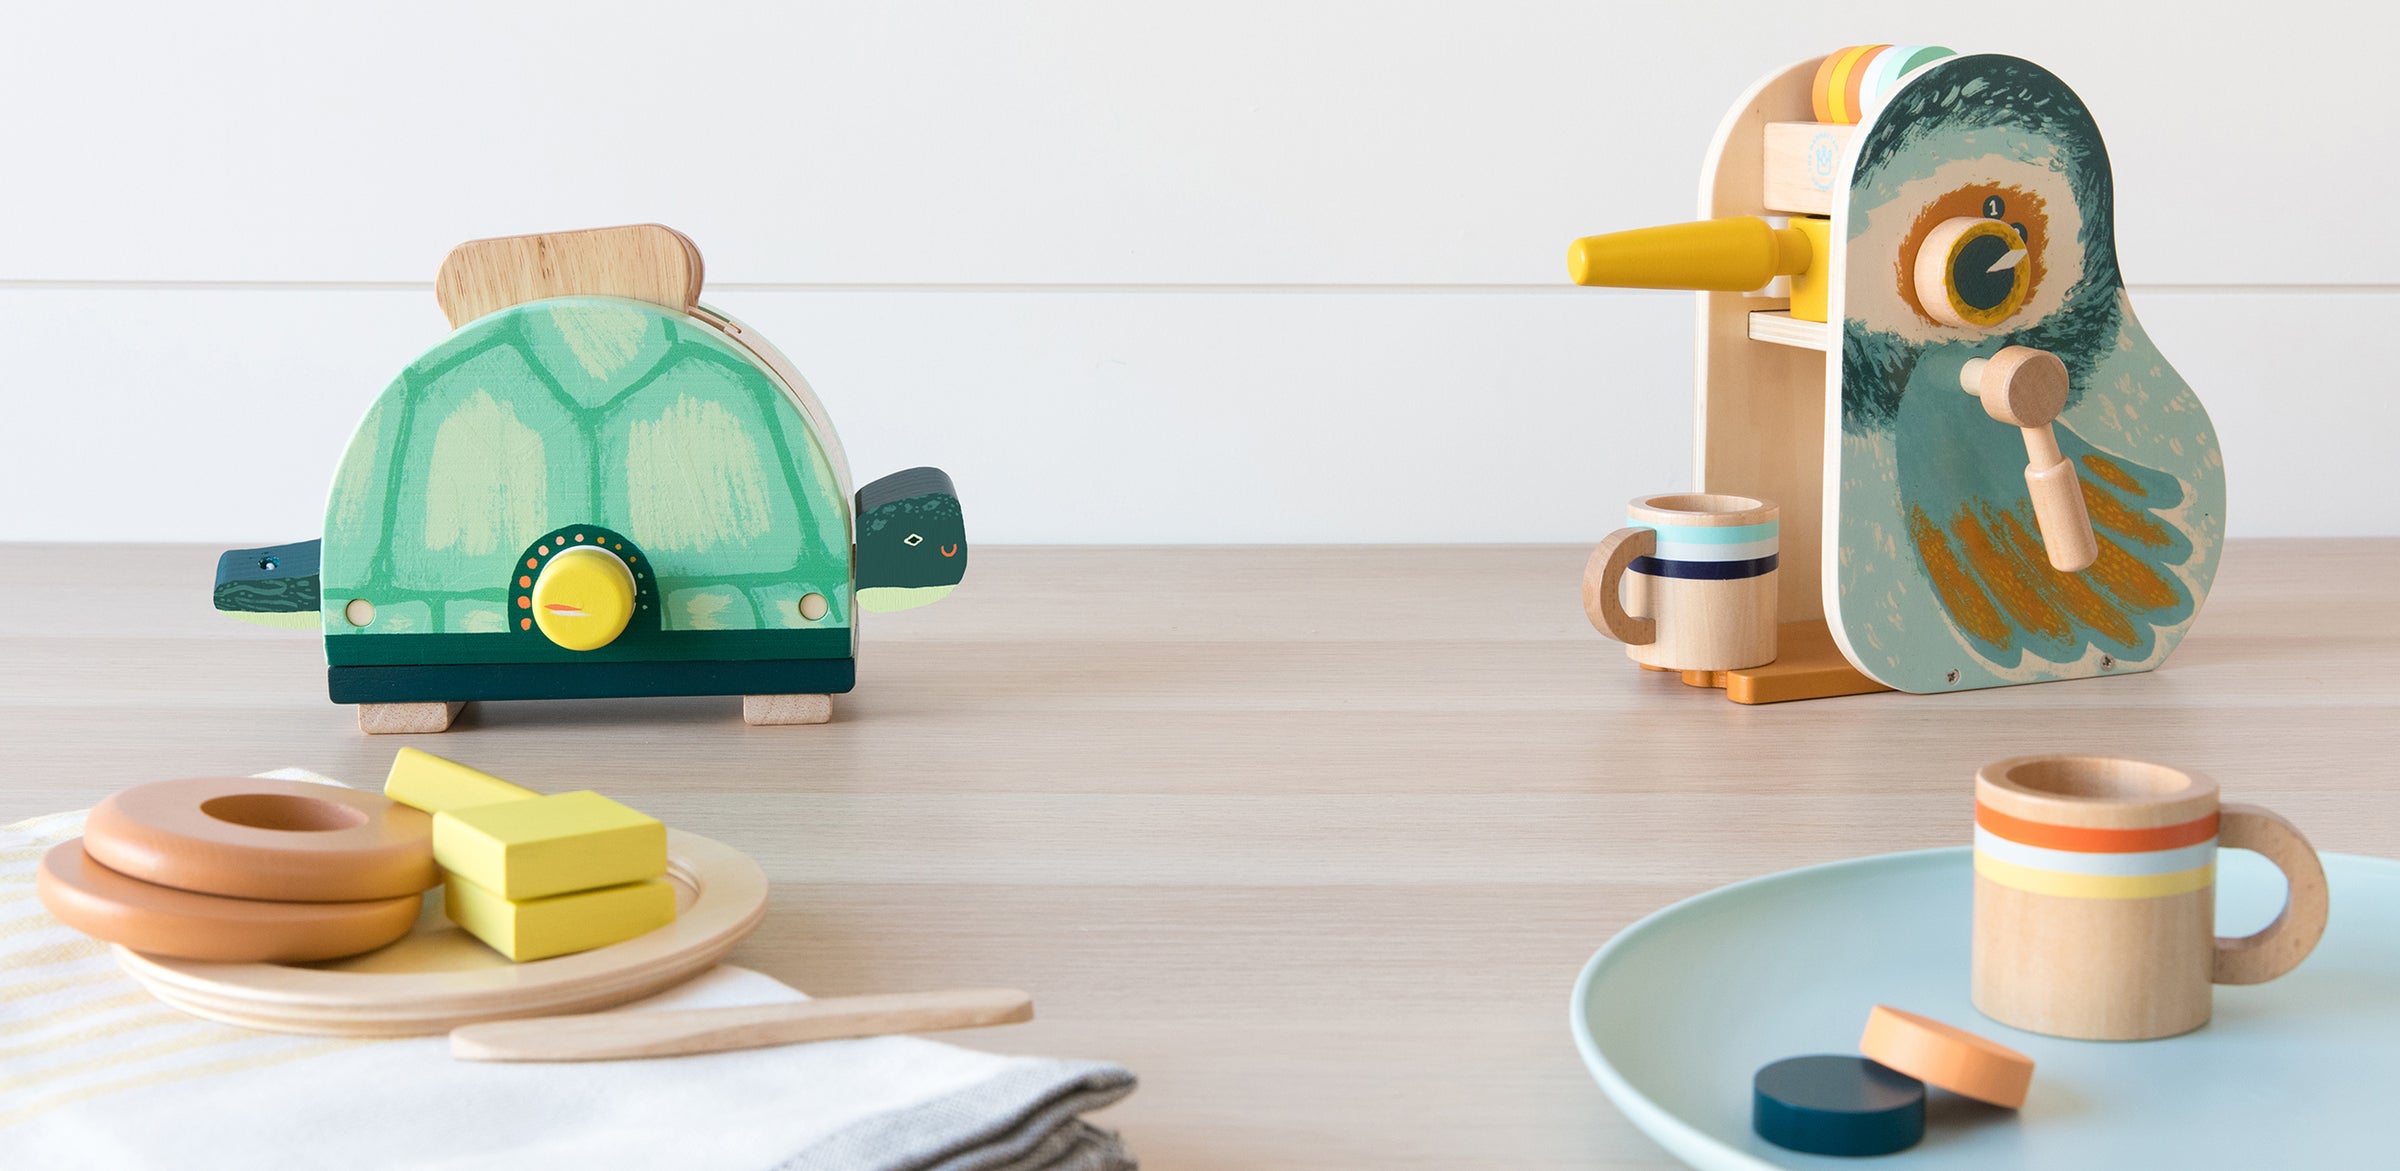 Cooking and food toys on wood table